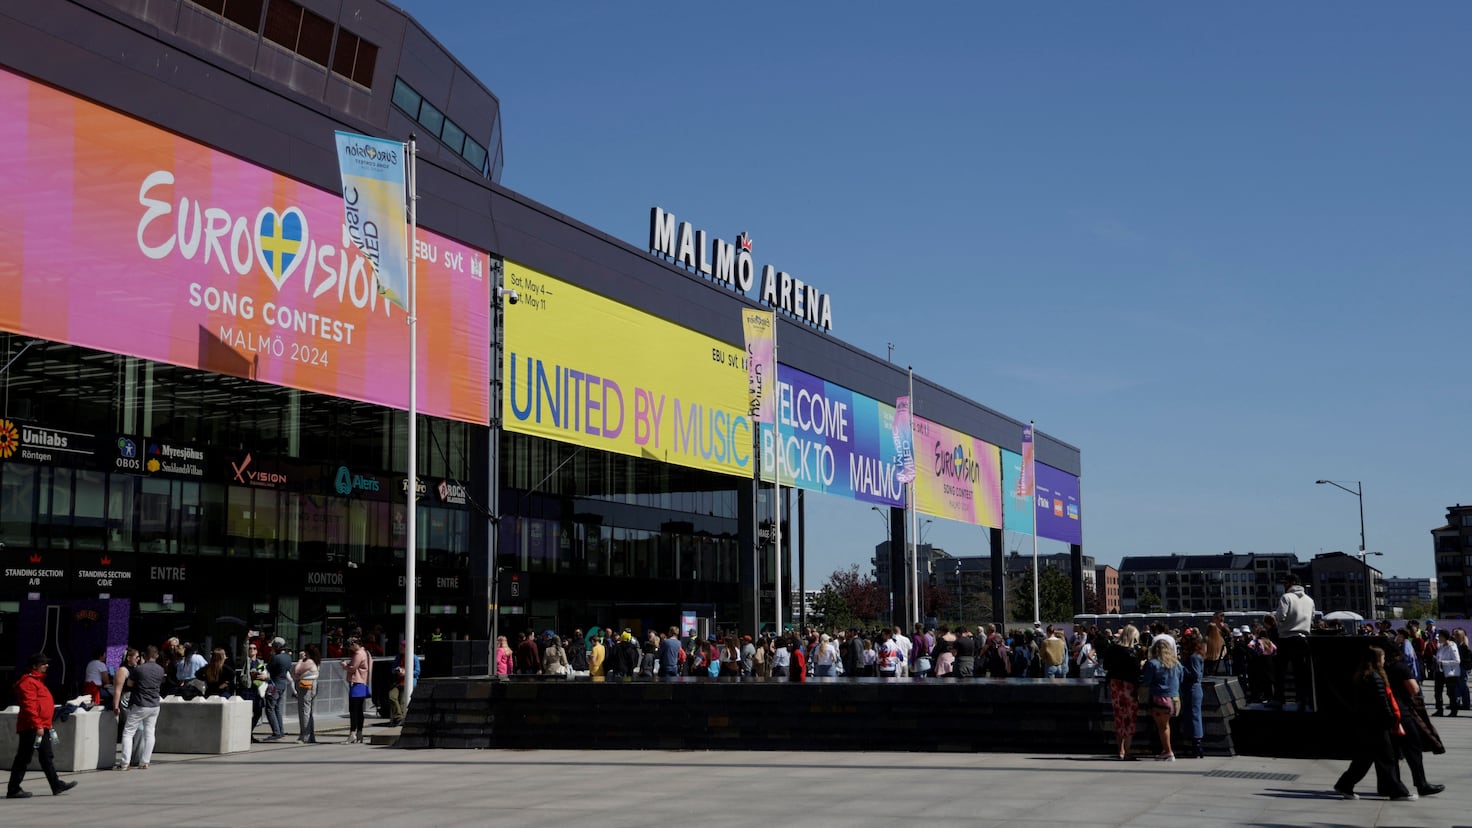 Why is Eurovision 2024 held in Sweden and how many people can fit in the Malm Arena?
